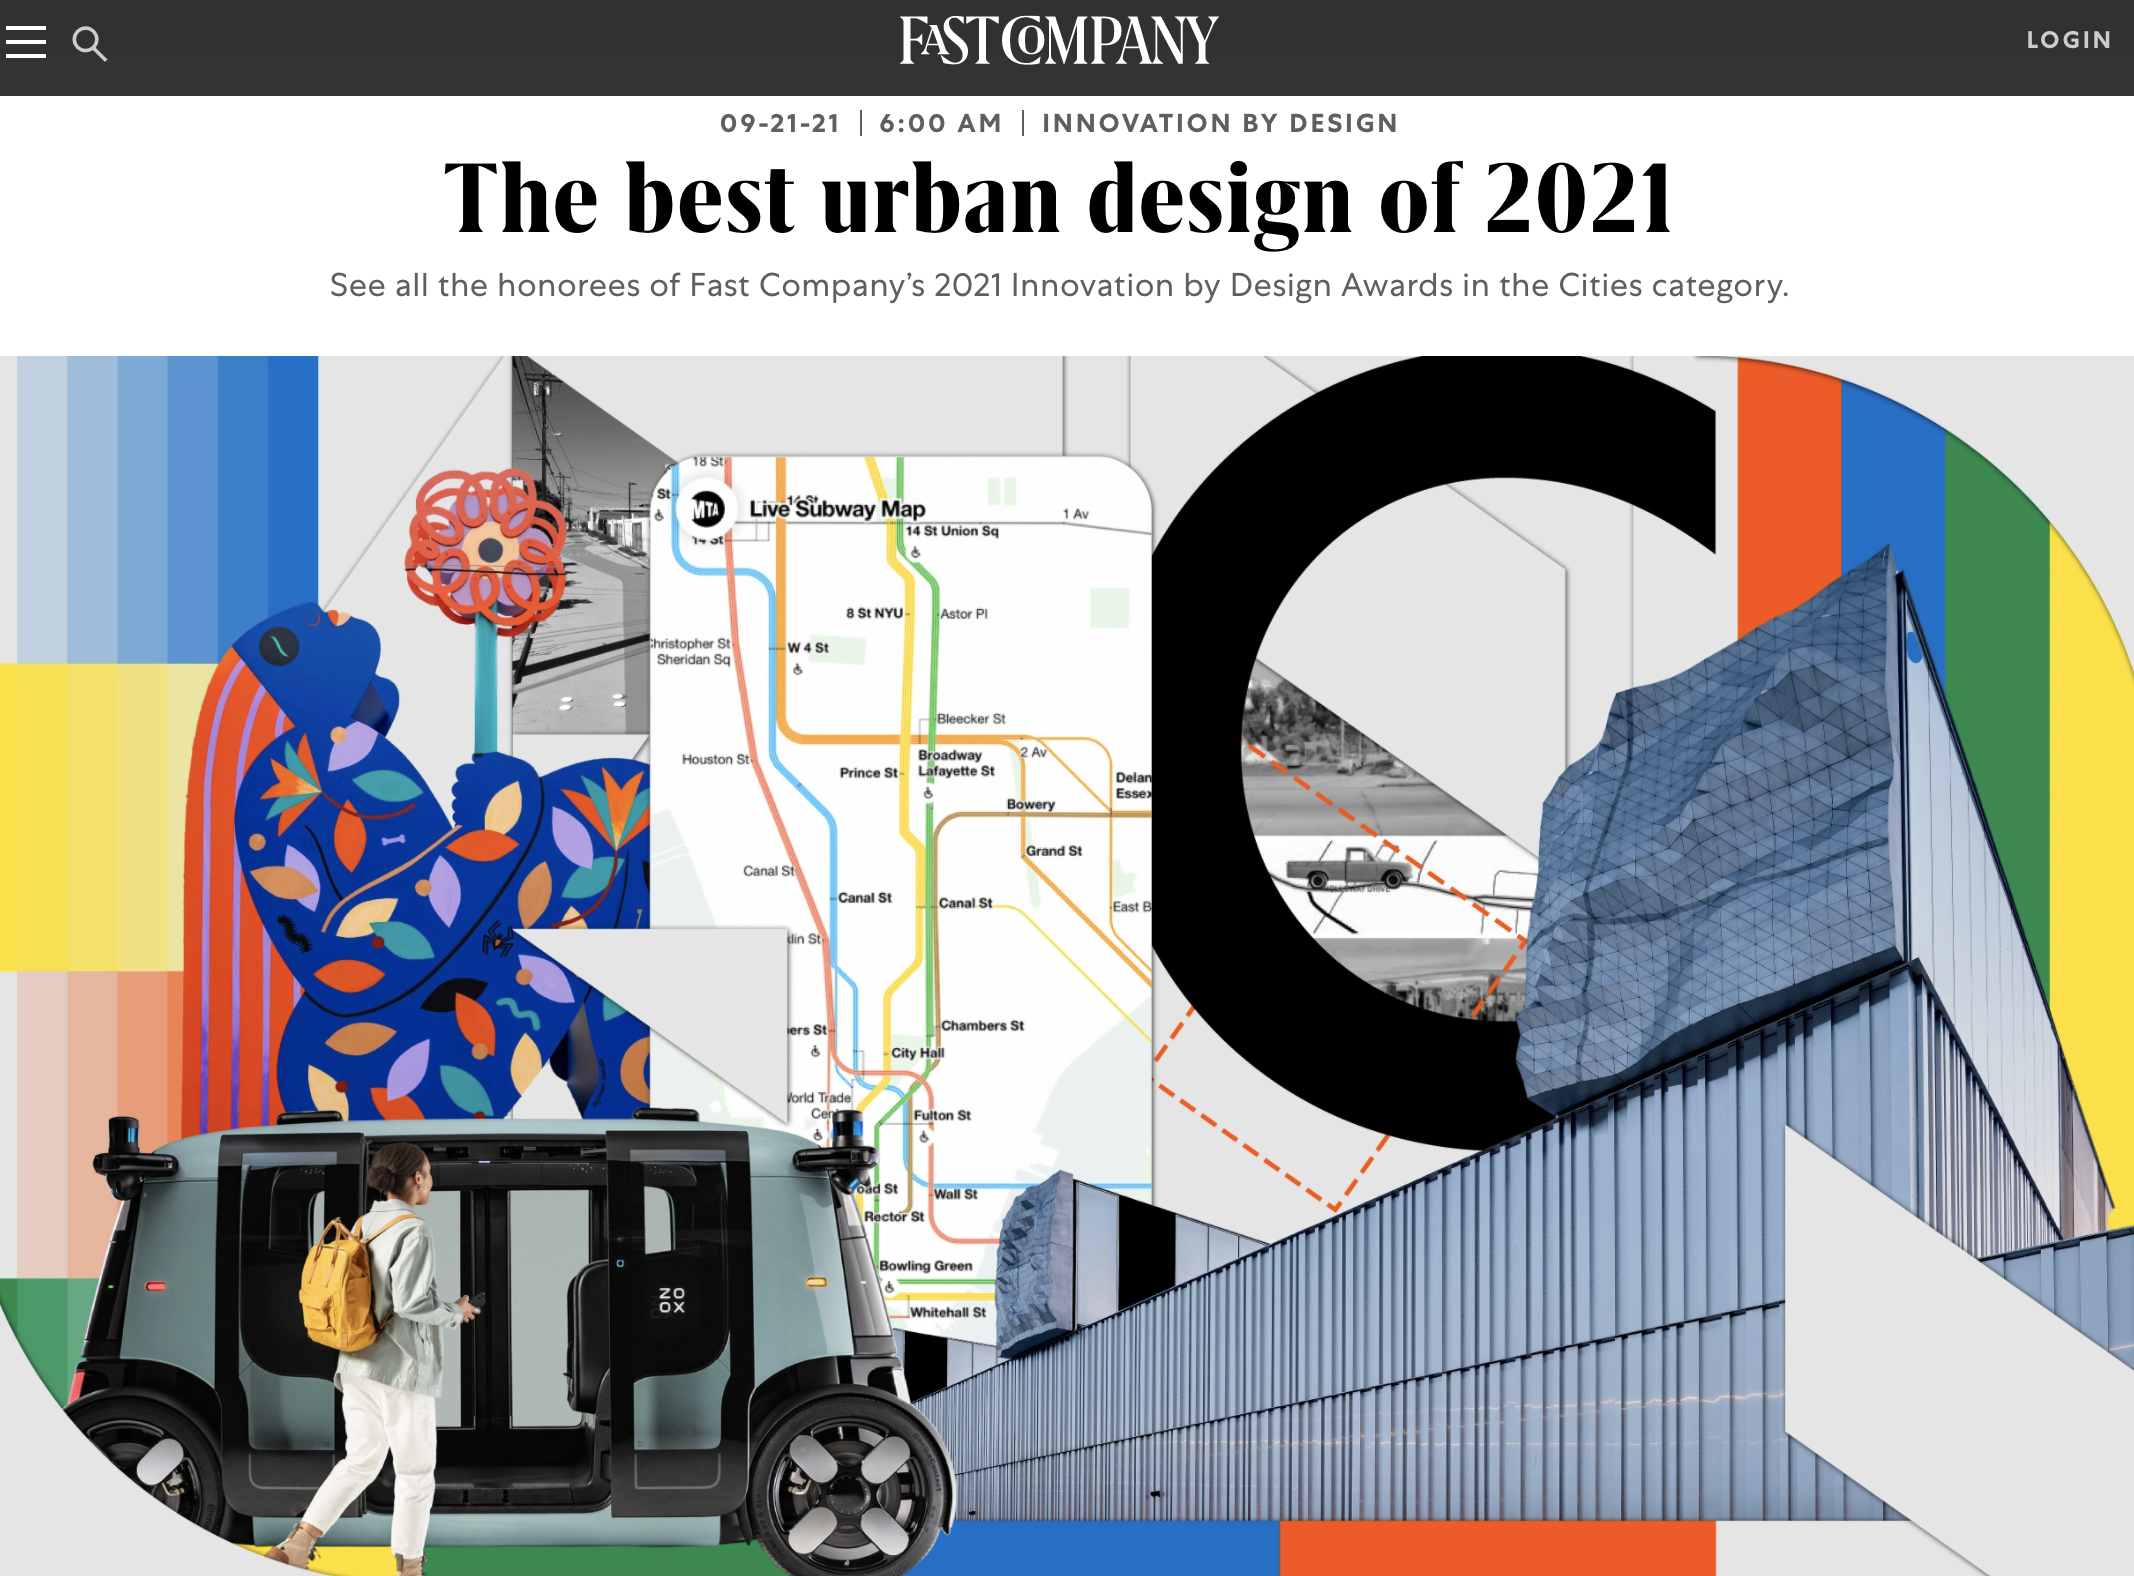 Screenshot of the Fast Company article with a collage of images and headline "The best urban design of 2021"